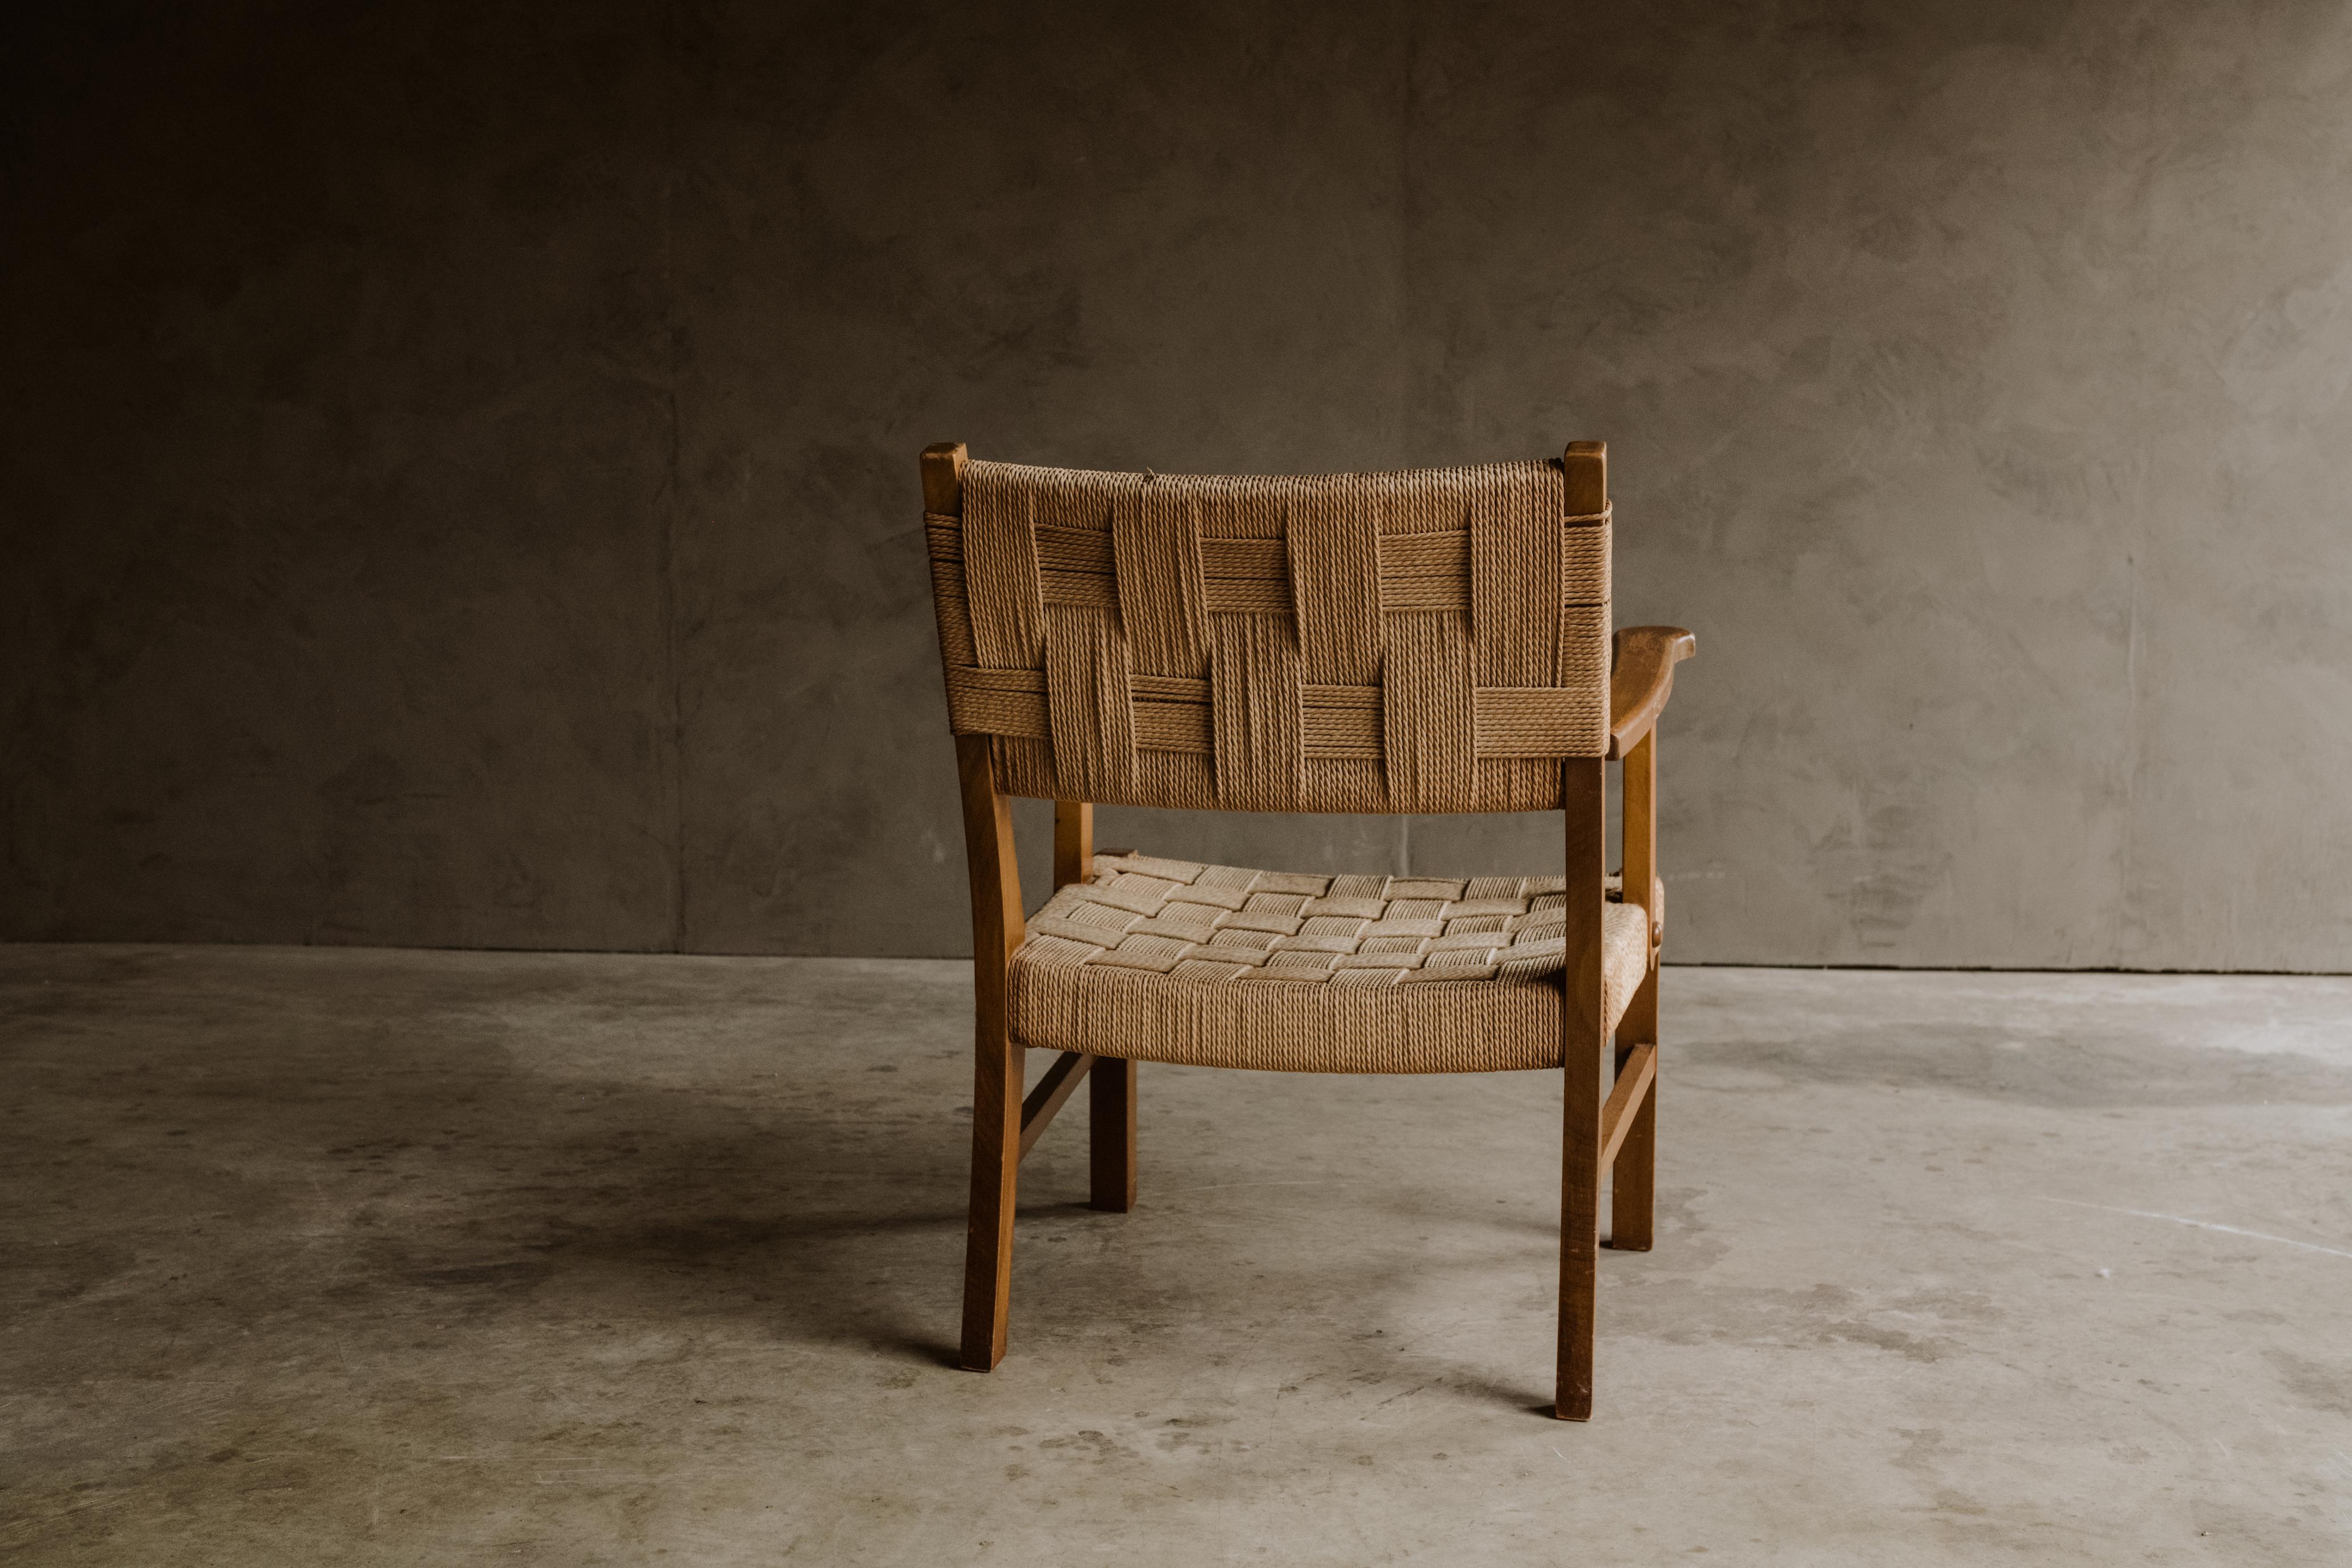 European Vintage Woven Lounge Chair from France, circa 1970